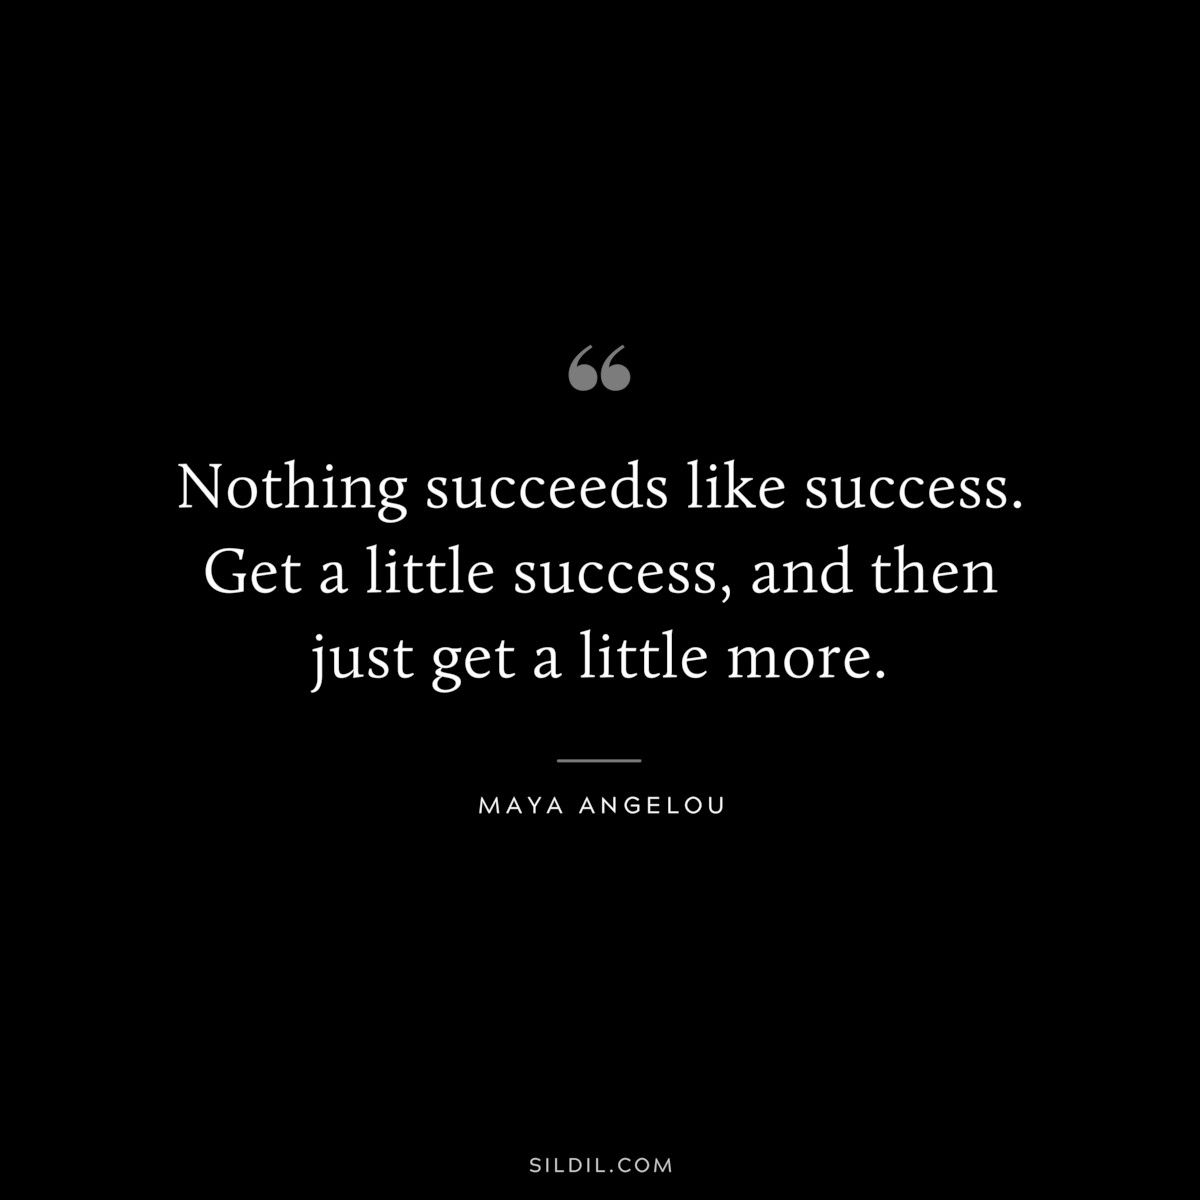 Nothing succeeds like success. Get a little success, and then just get a little more. ― Maya Angelou